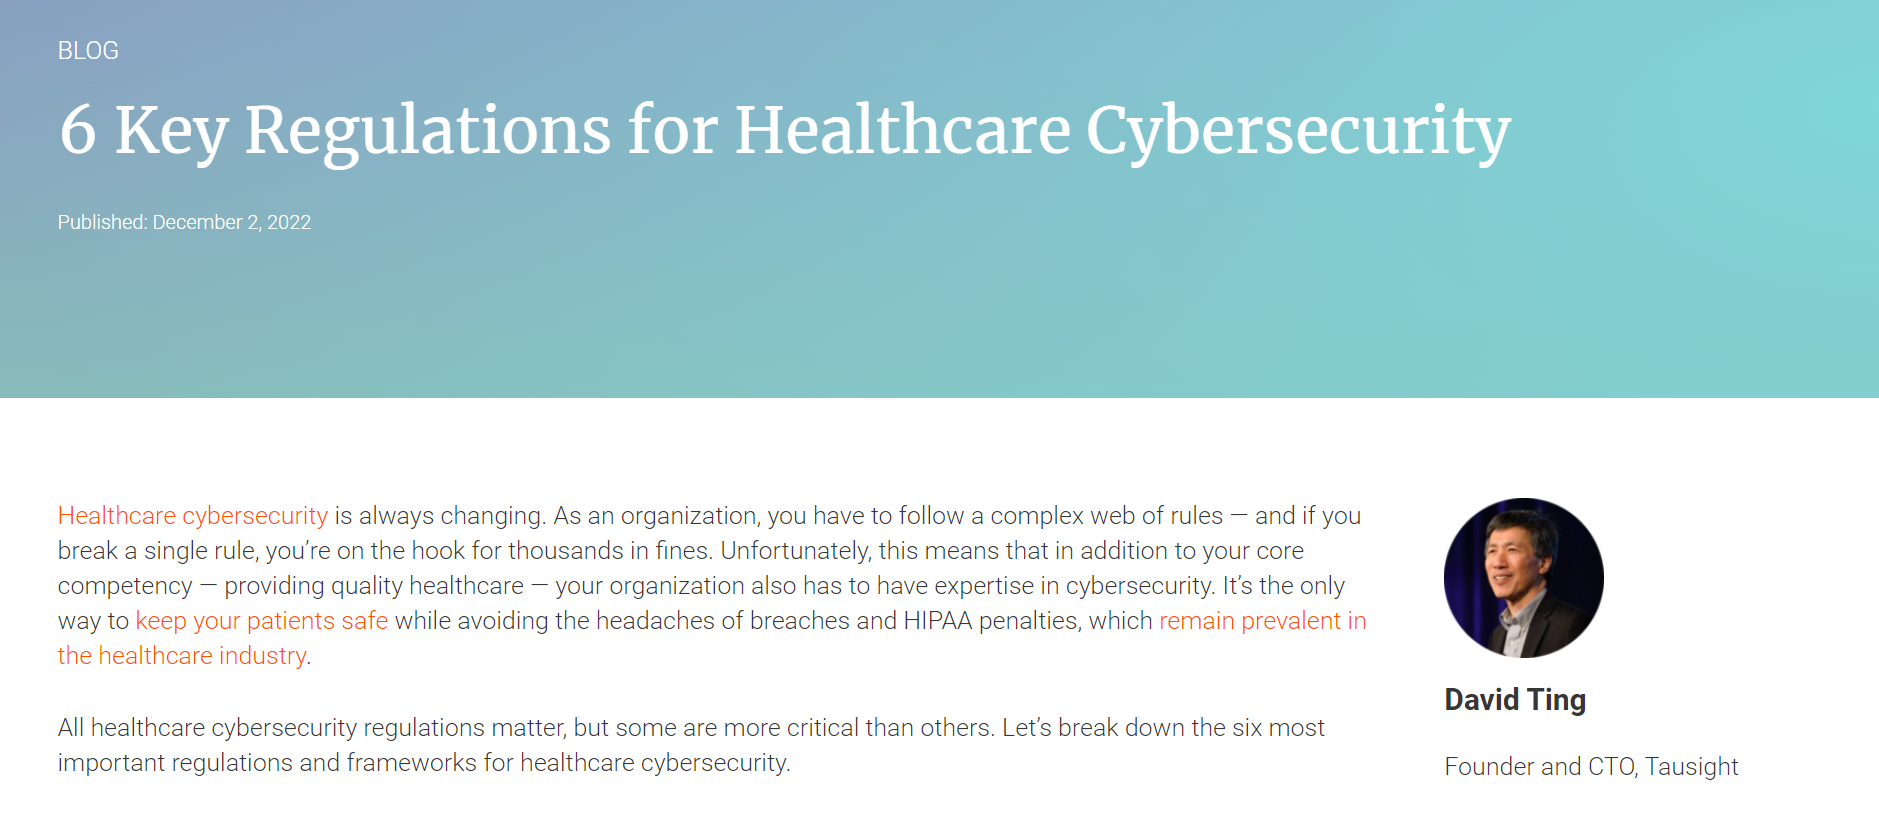 6 Key Regulations for Healthcare Cybersecurity